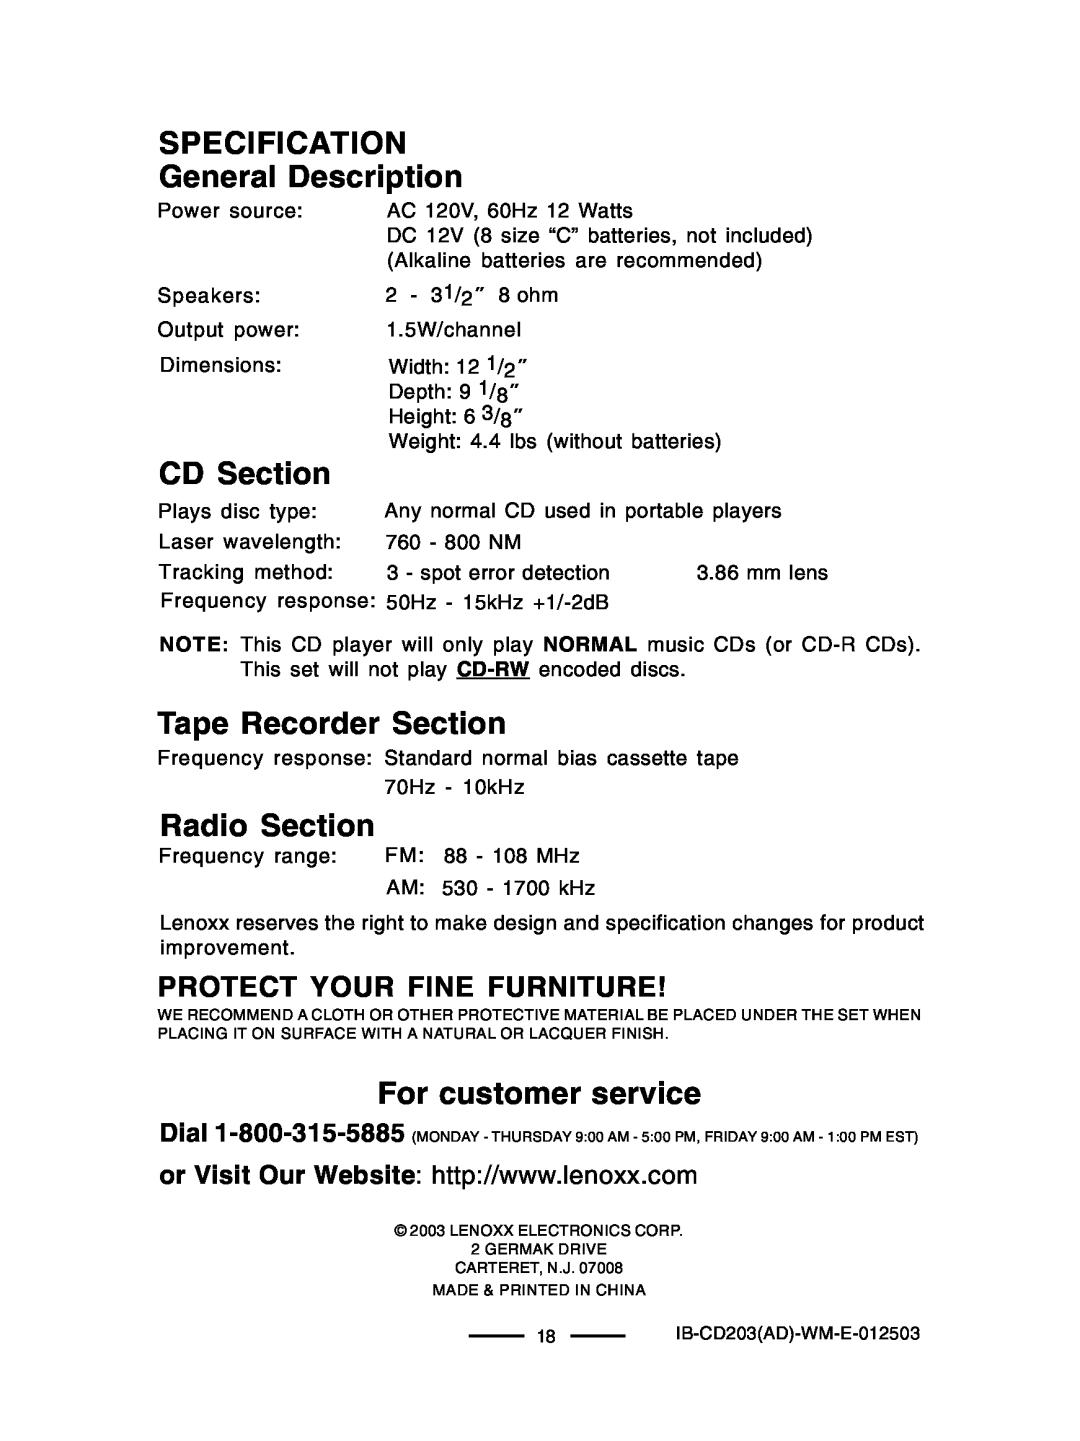 Lenoxx Electronics CD203 manual SPECIFICATION General Description, CD Section, Tape Recorder Section, Radio Section 